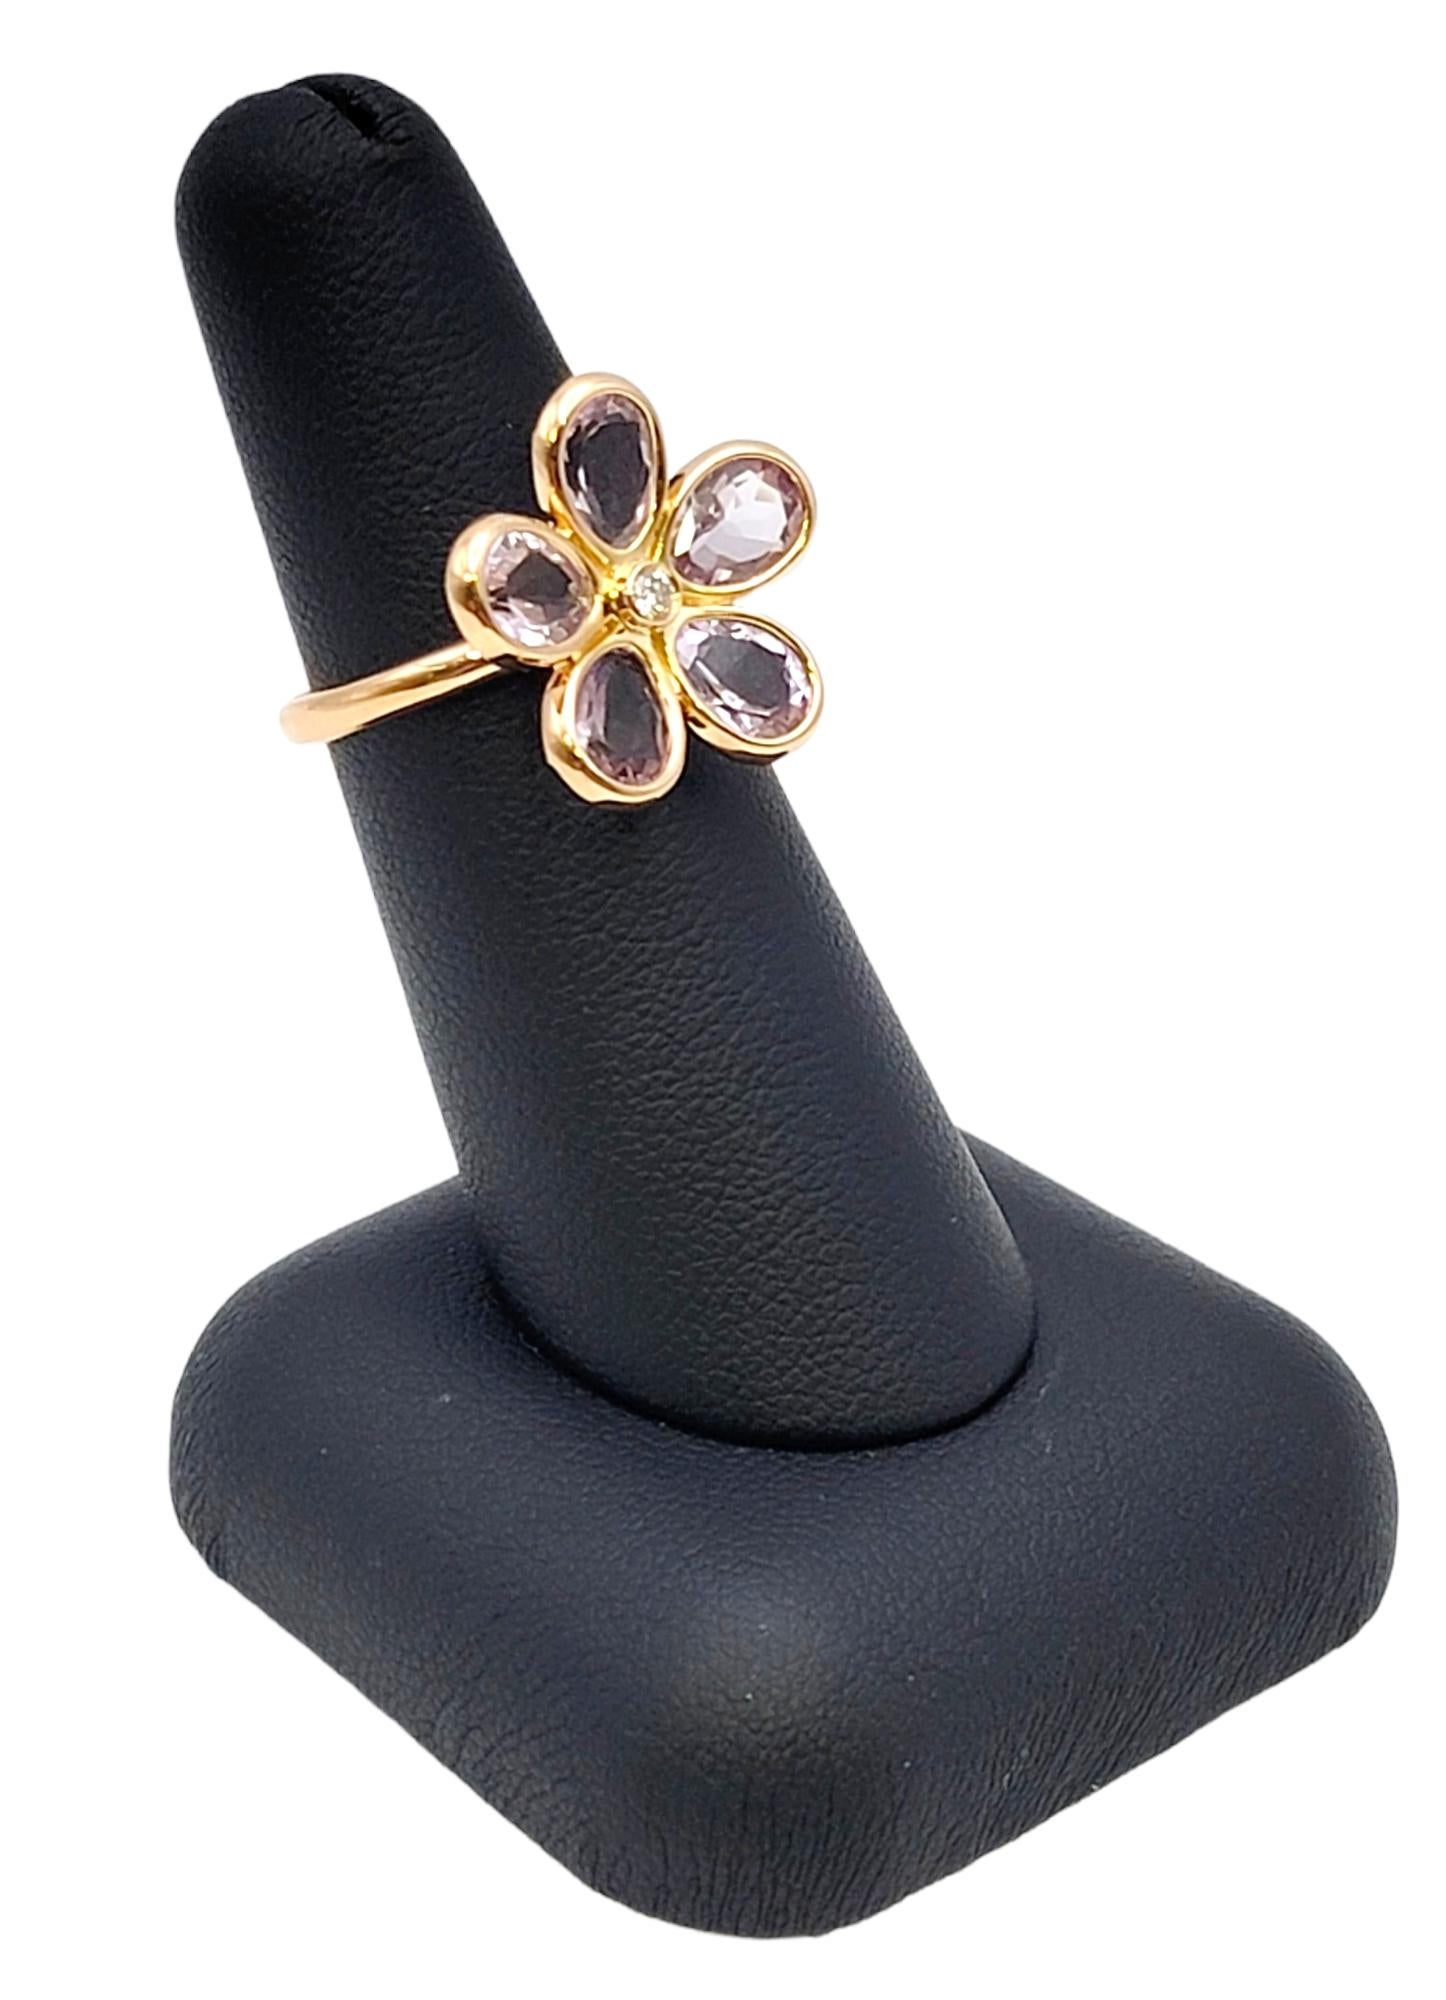 Tiffany & Co. Amethyst and Diamond Sparklers Flower Ring in 18 Karat Rose Gold 5